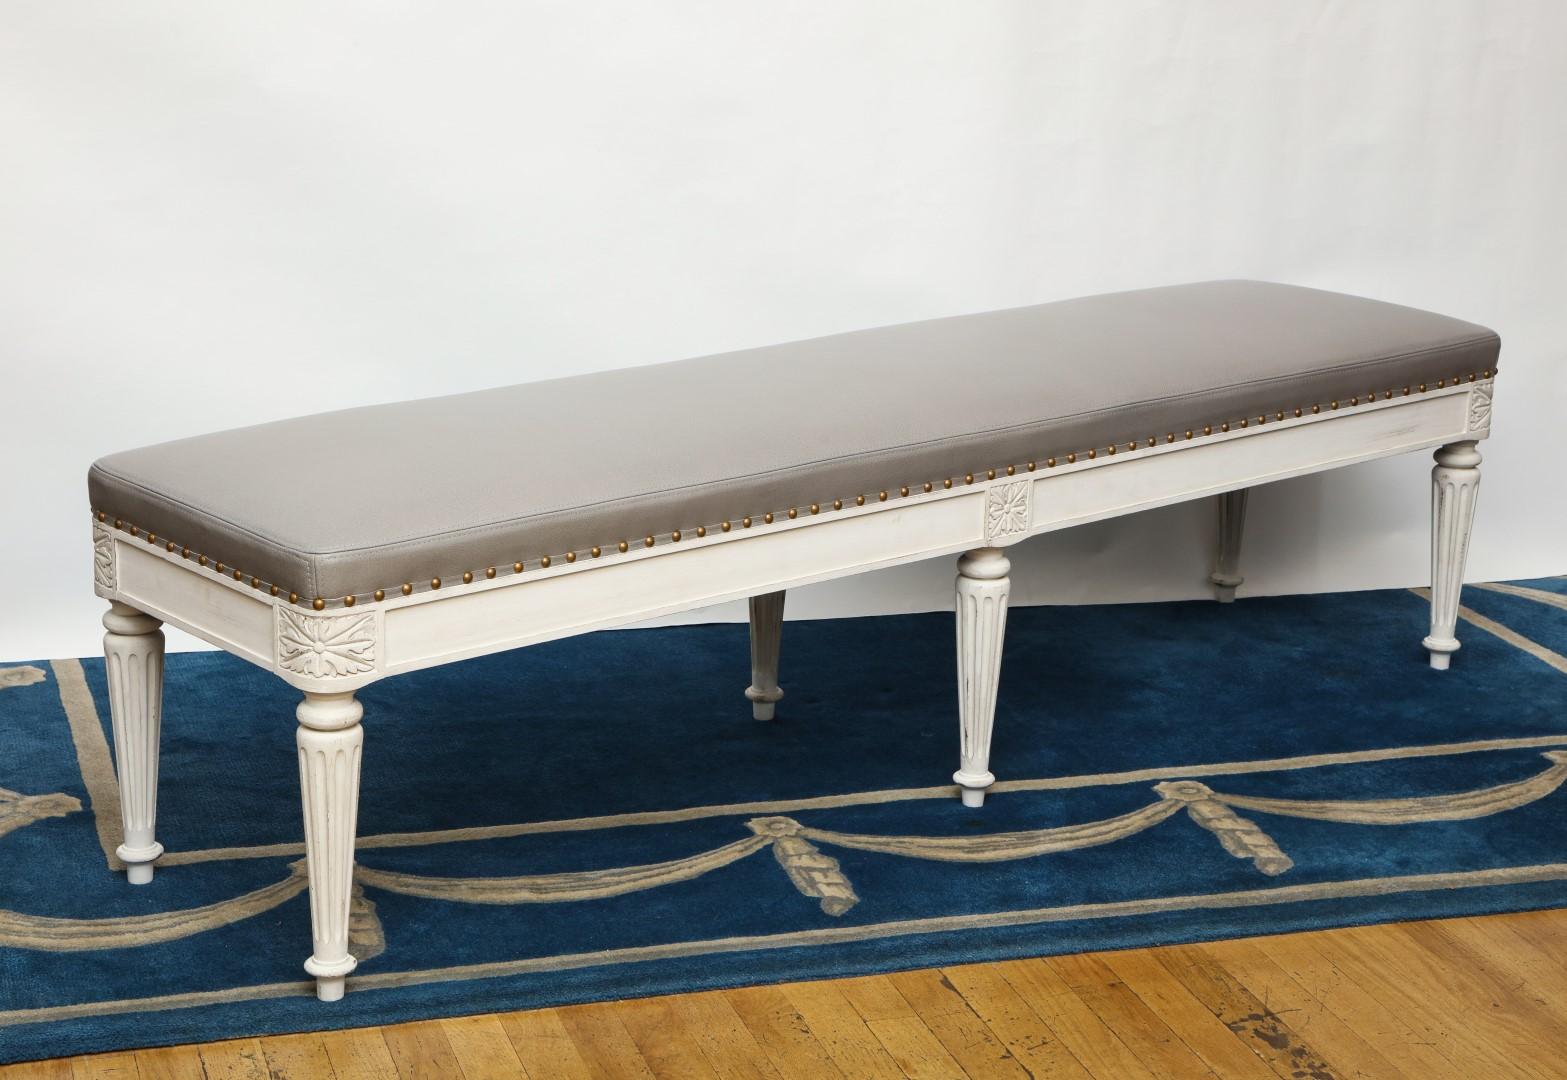 Painted Montreuil Bench, Louis XVI Style Bench with Leather Upholstery, by David Duncan For Sale